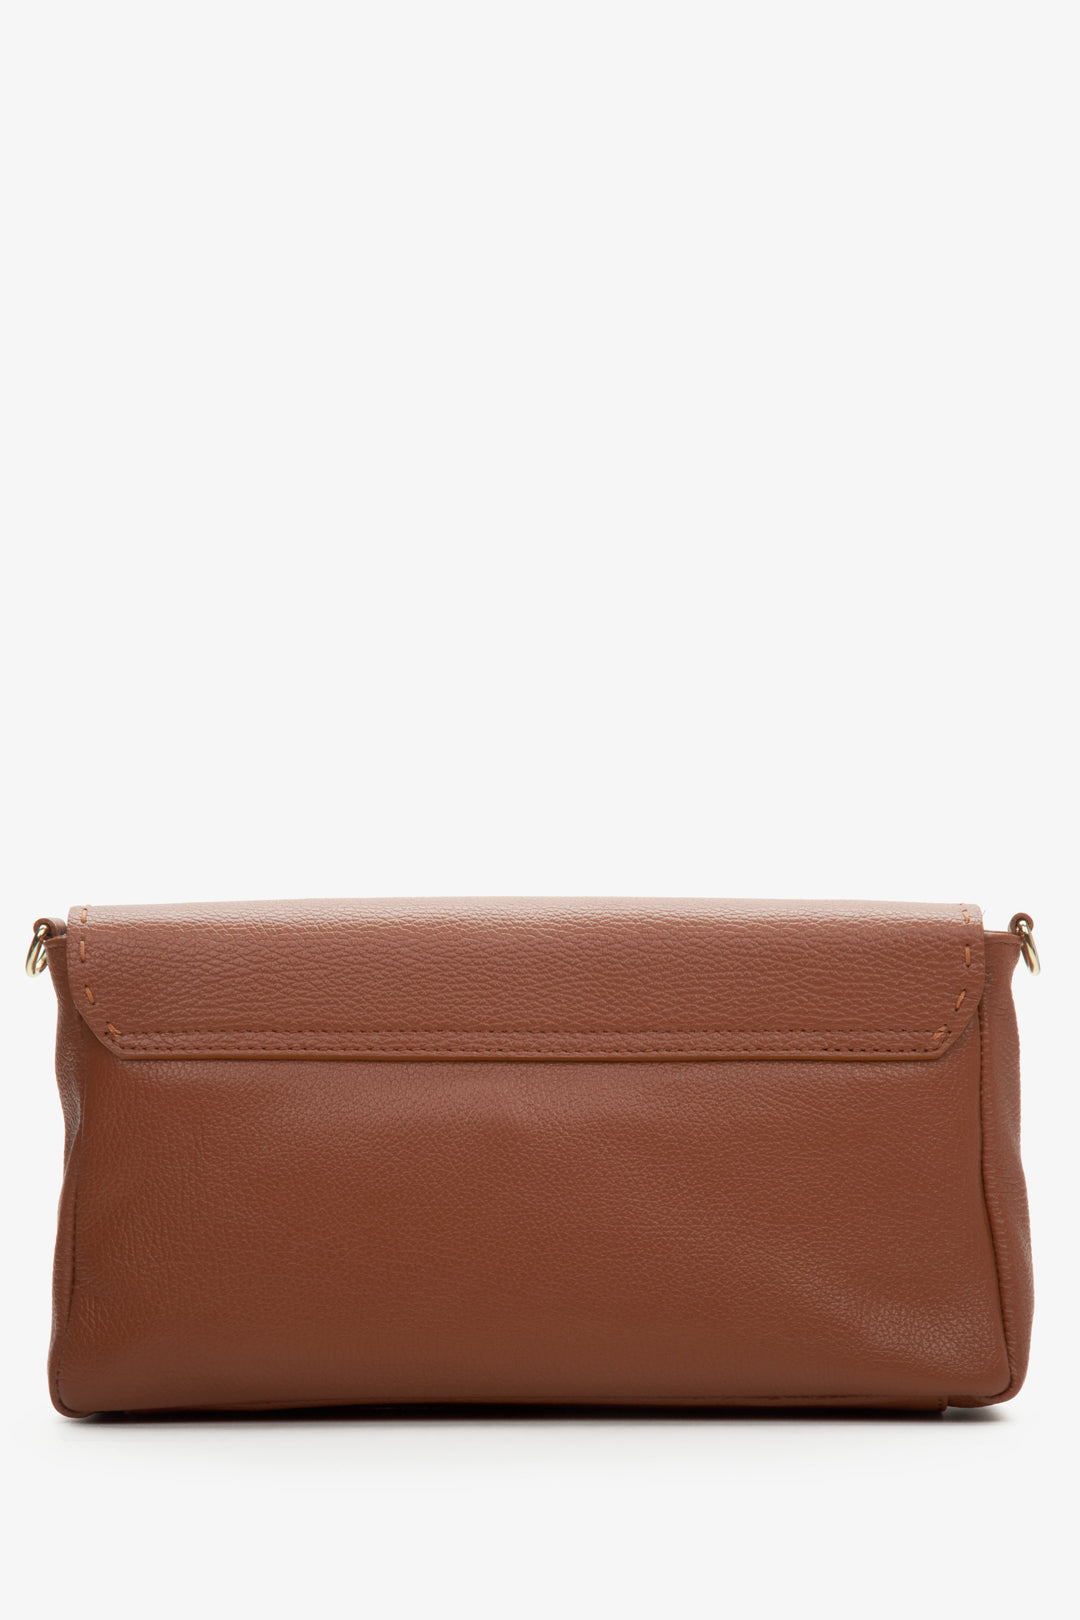 Women's small brown handbag made of genuine leather by Estro - back view.